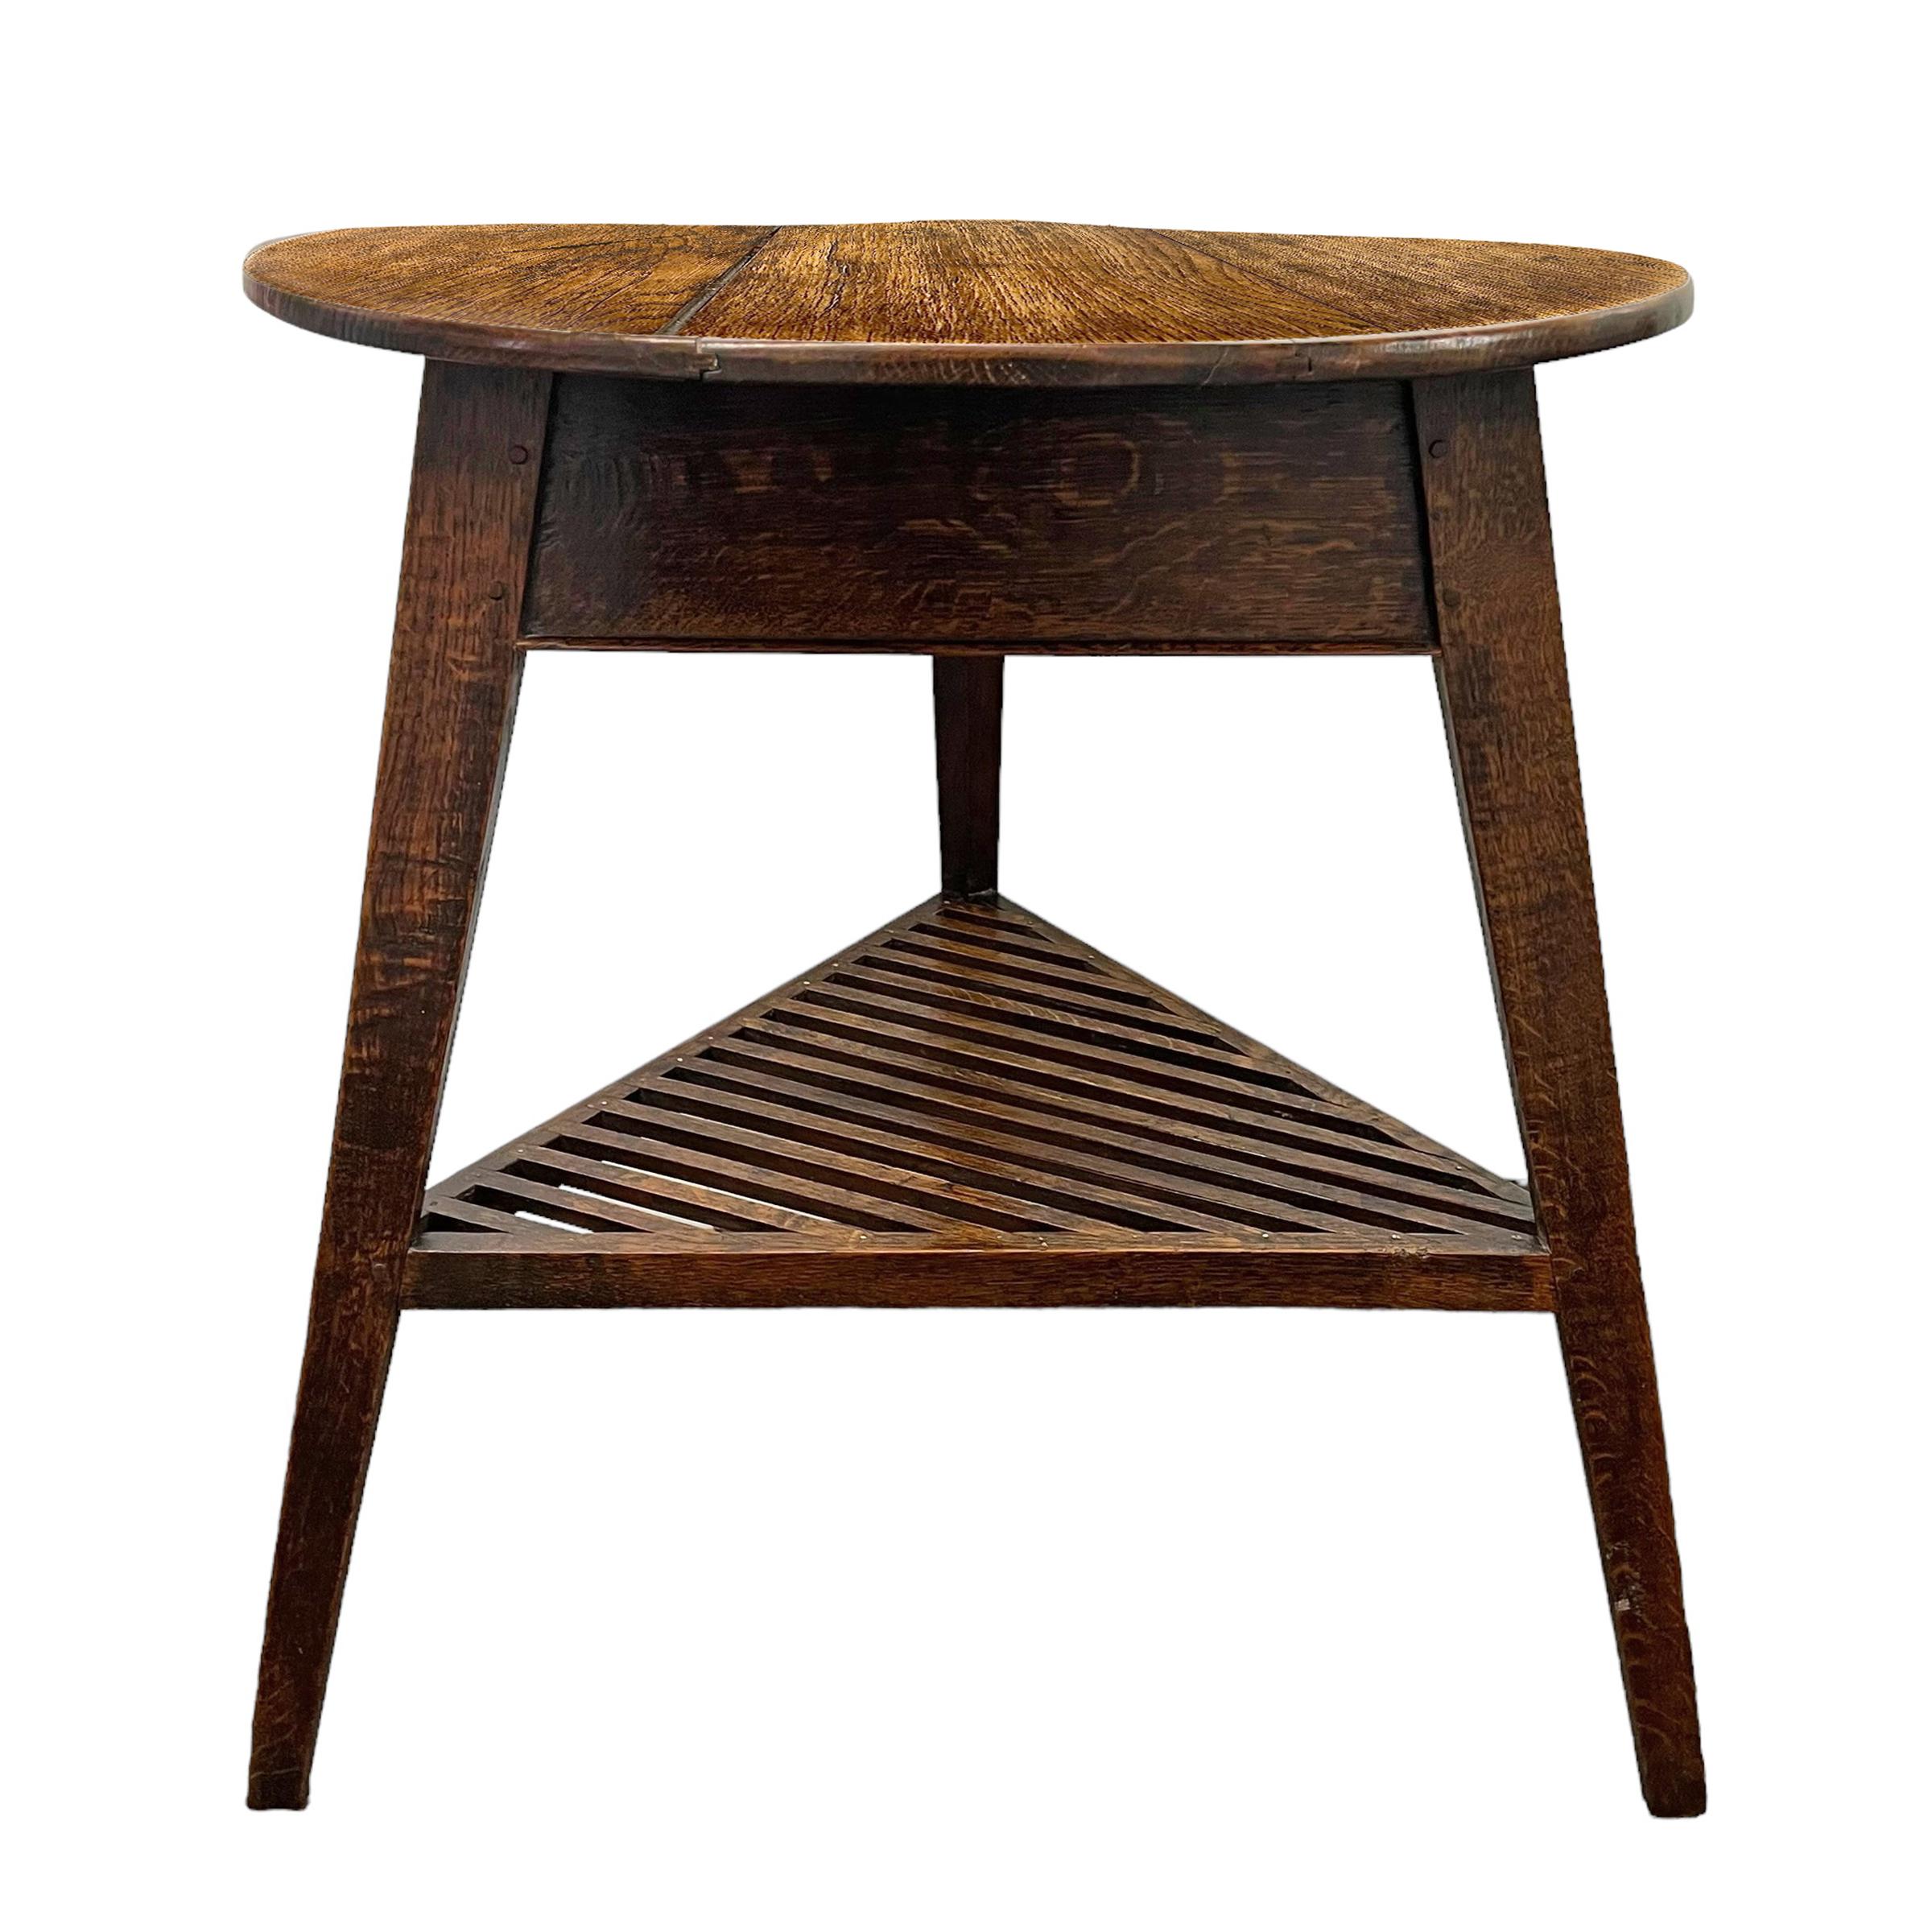 19th Century English Cricket Table with Lattice Shelf In Good Condition For Sale In Chicago, IL